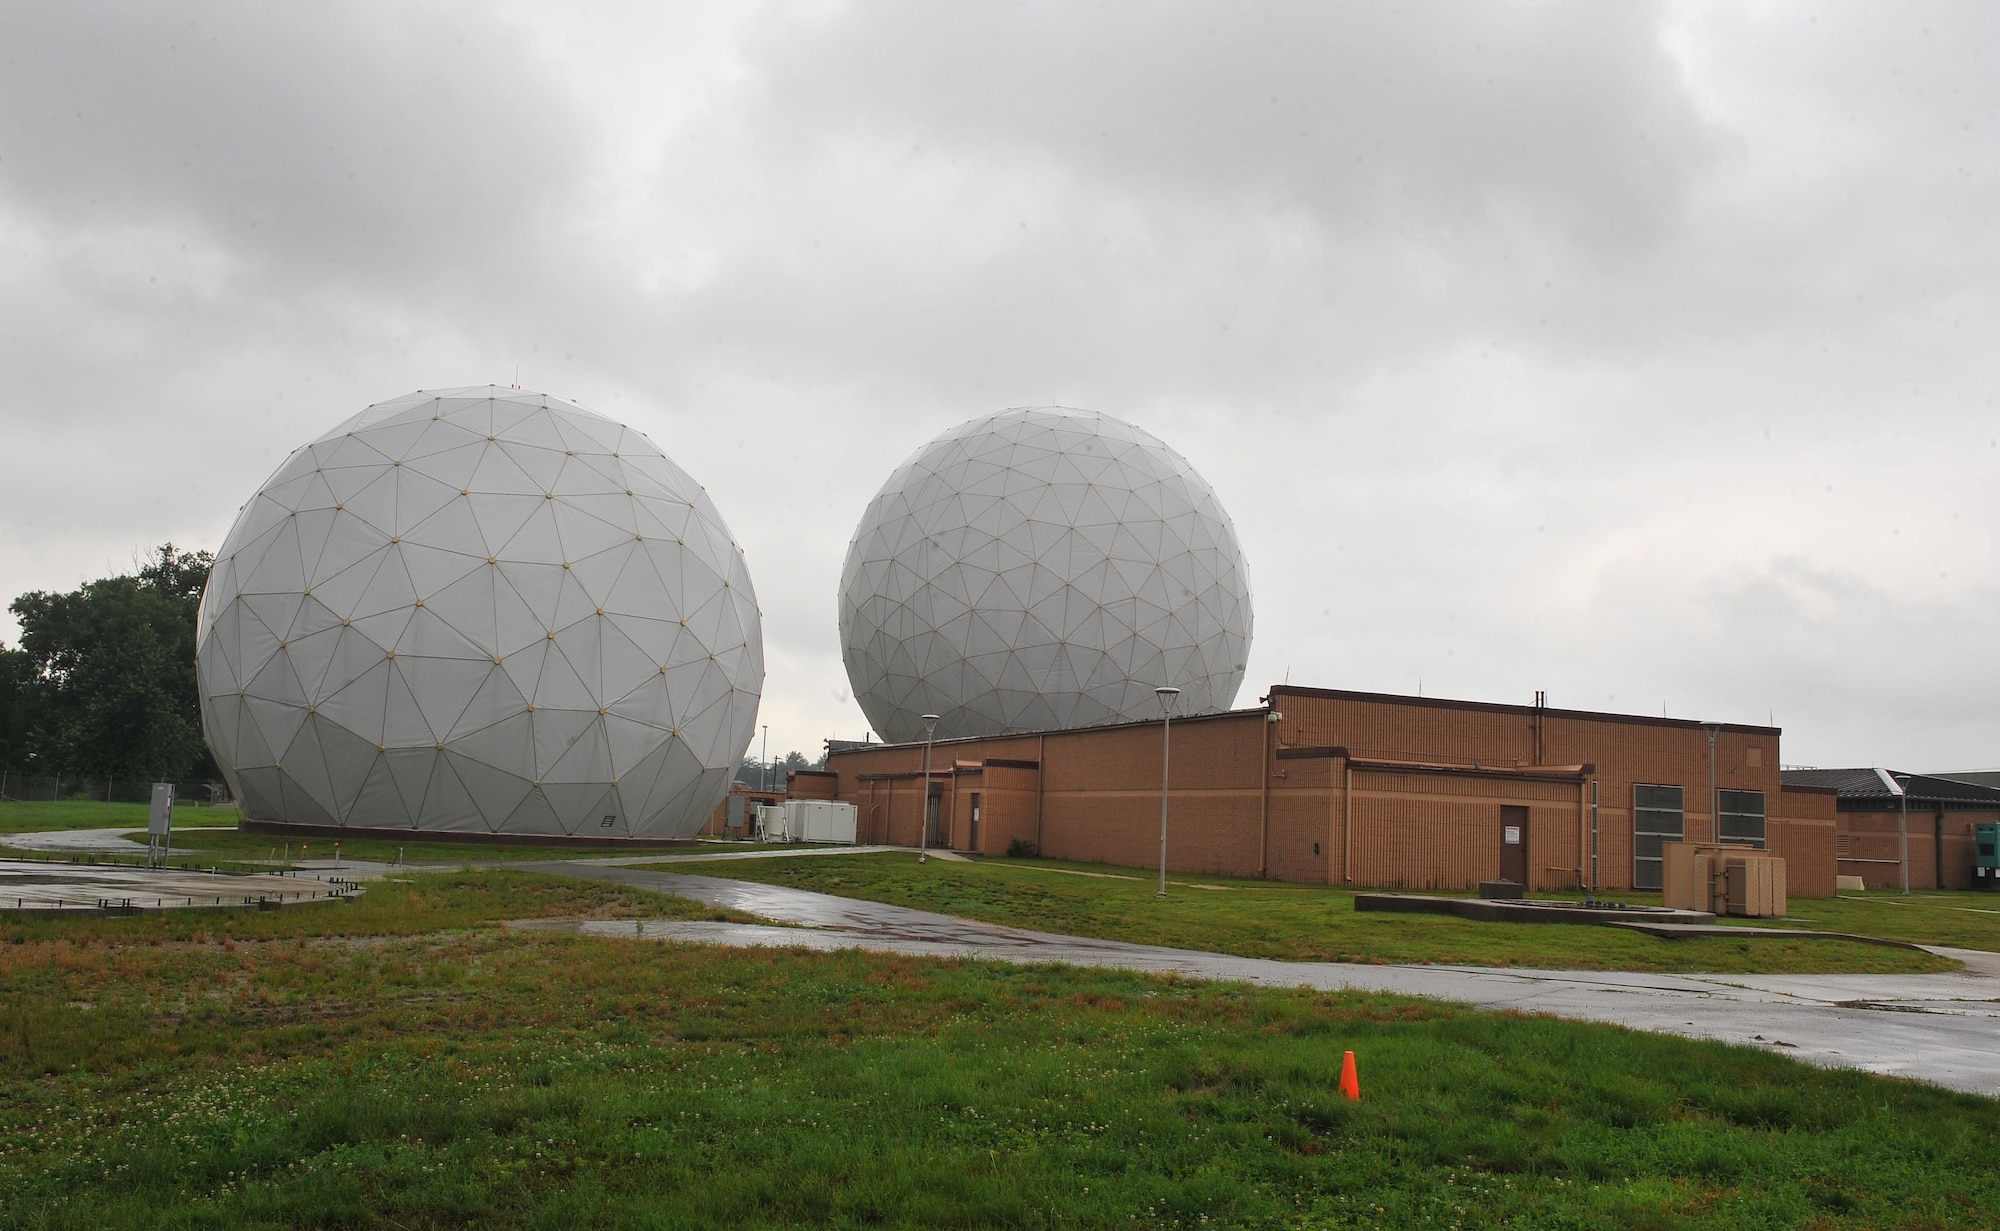 Underneath the spherical protective coverings are two Air Force Wideband Enterprise Terminals located at Offutt Air Force Base, Neb. The terminals are among approximately 90 joint systems used worldwide to communicate and transfer information across the Global Information Grid. The AFWET program office from Hanscom AFB, Mass., is in the process of installing new modernization kits onto the systems. (U.S. Air Force photo/Josh Plueger)